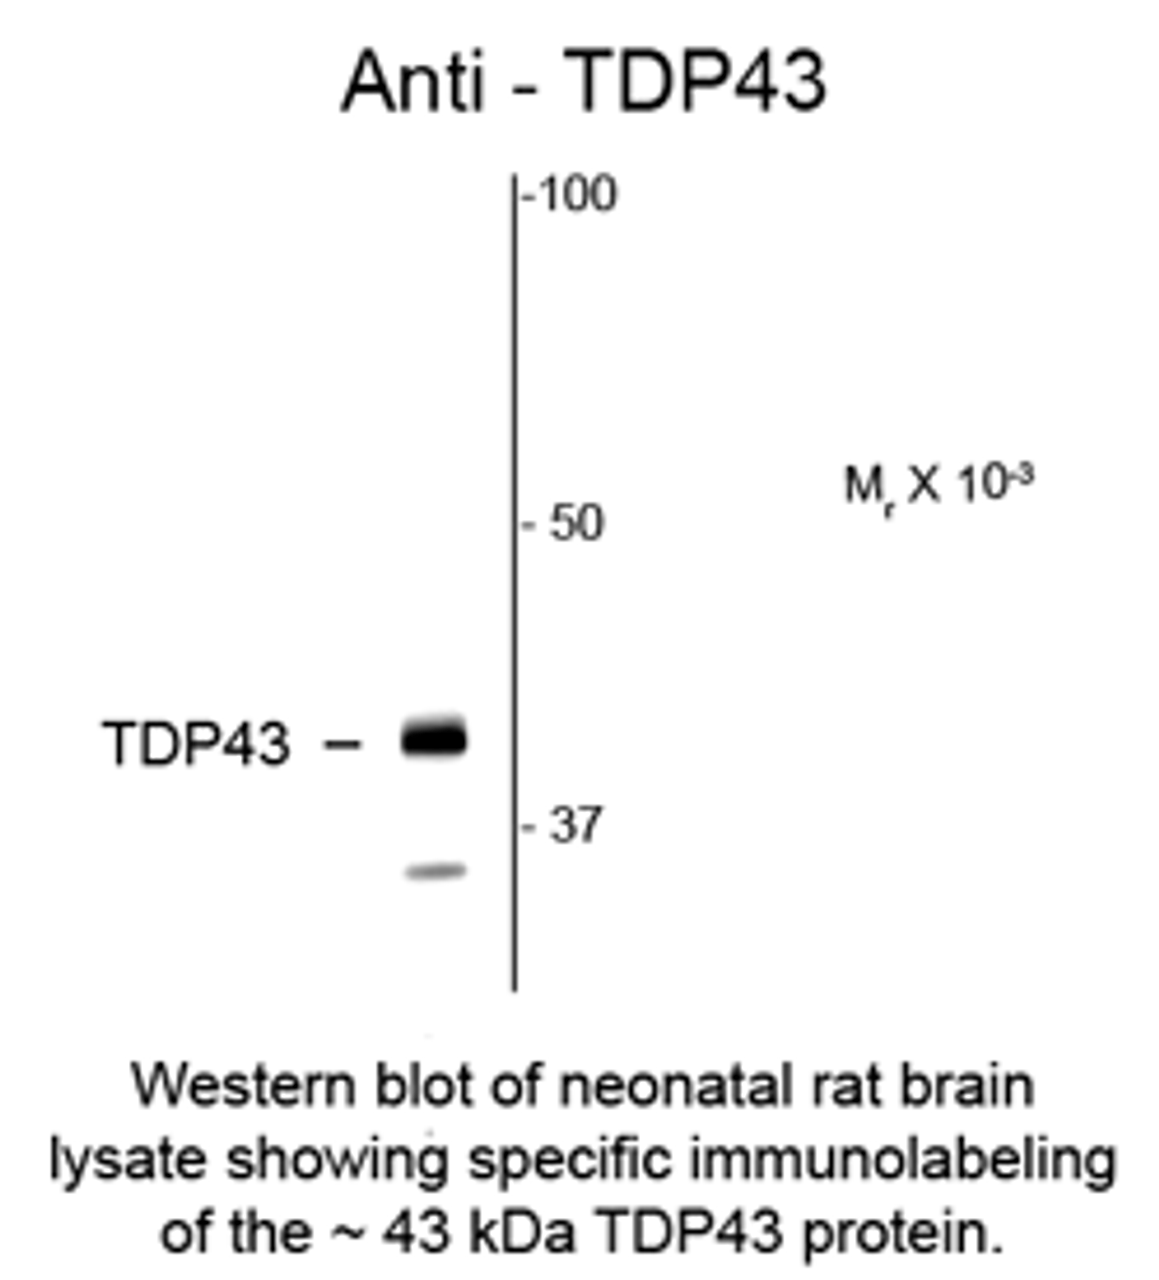 Western blot of neonatal rat brain lysate showing specific immunolabeling of the ~43 kDa TDP43 protein.